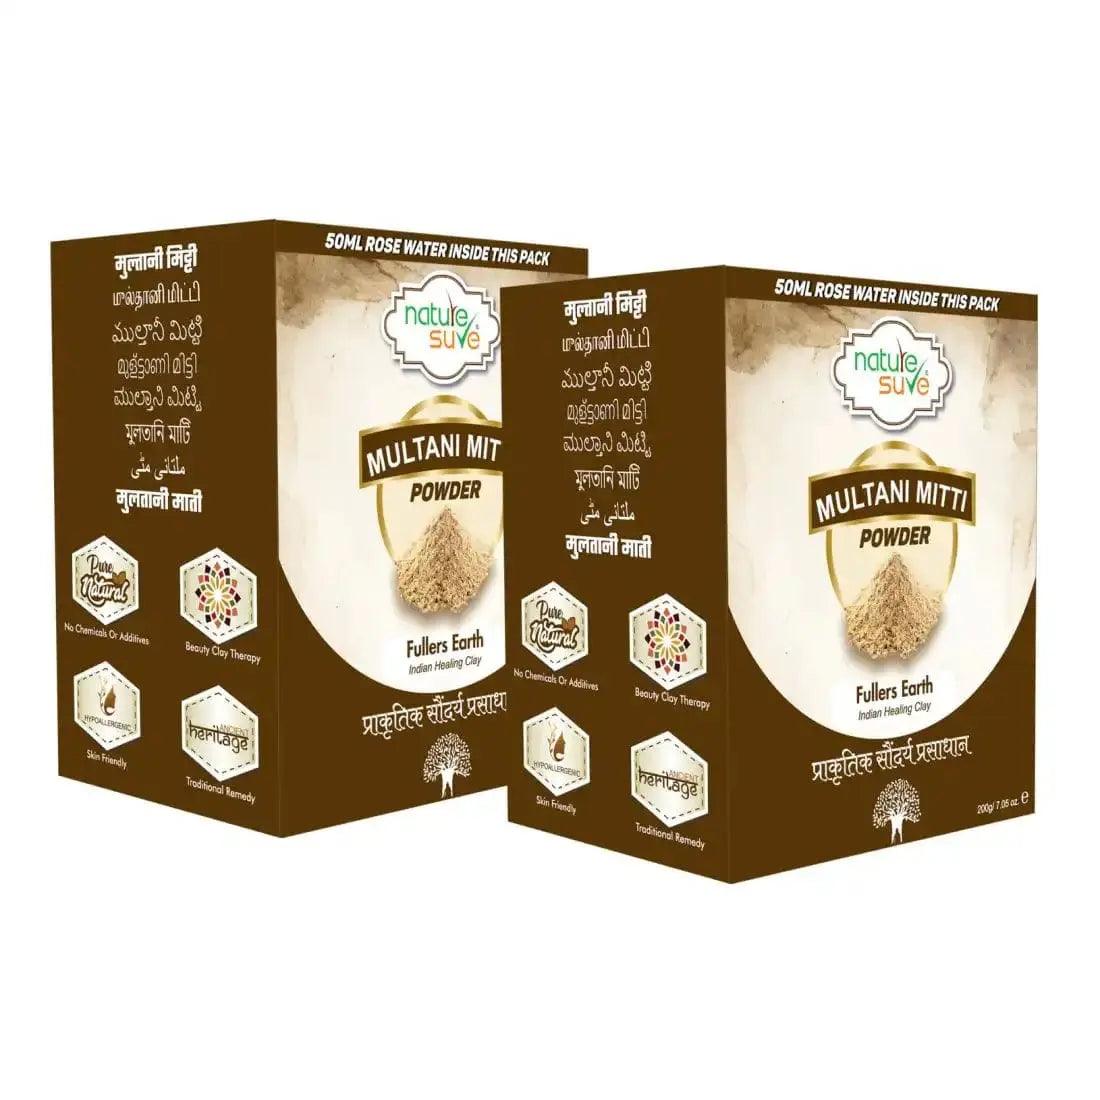 Buy 2 Packs Nature Sure Multani Mitti Powder 200g with Rose Water 50ml directly from company - everteen-neud.com